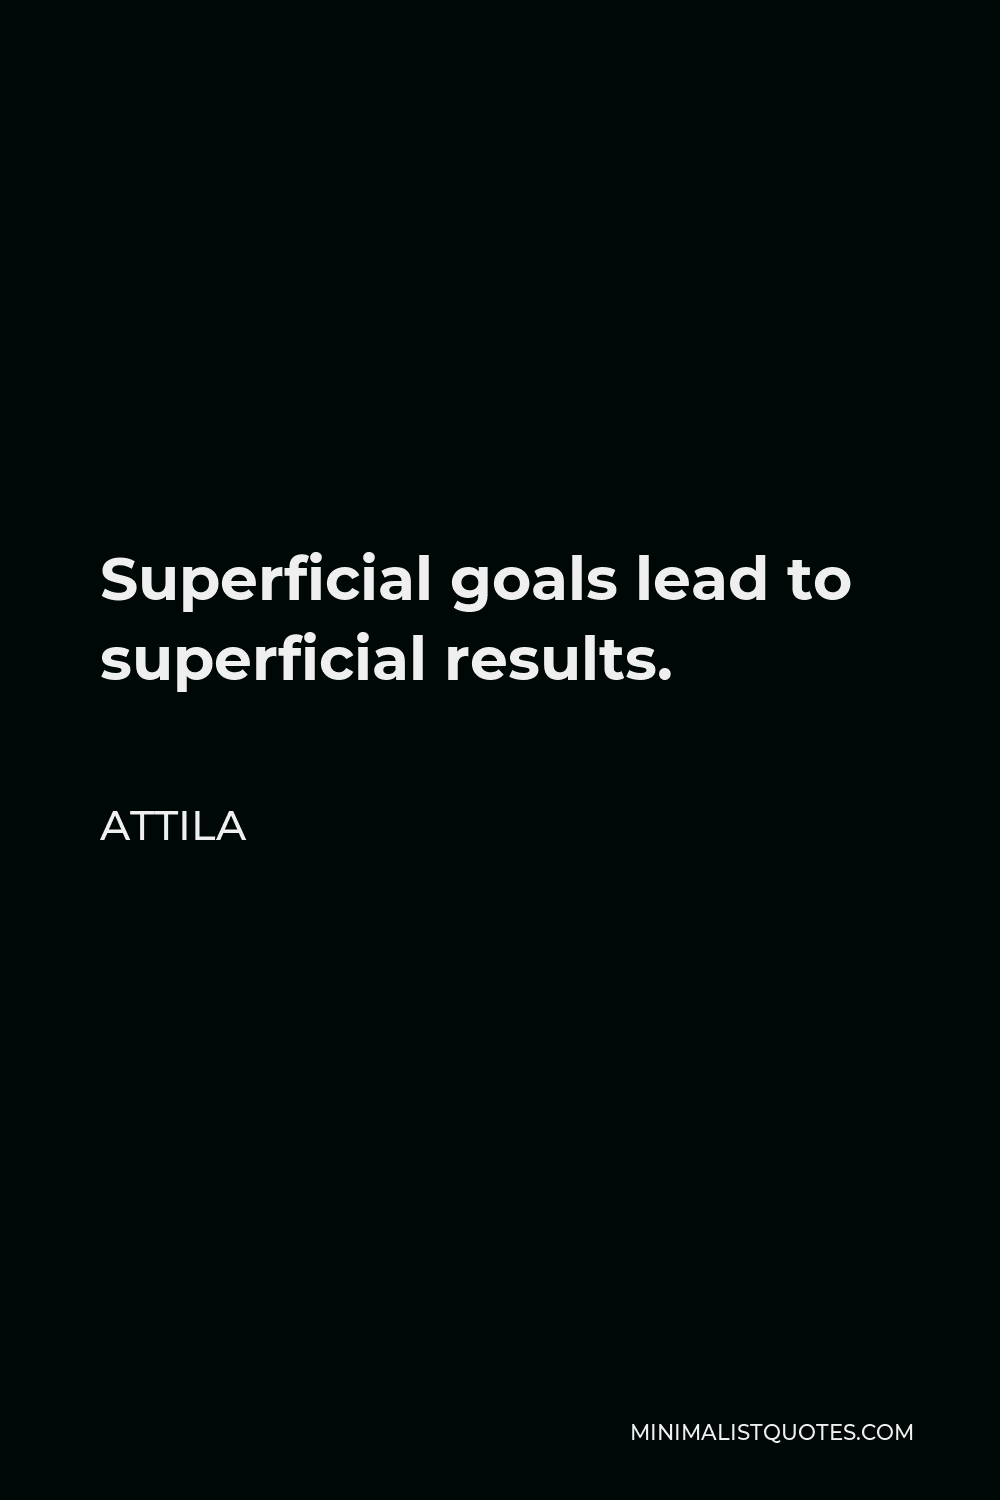 Attila Quote - Superficial goals lead to superficial results.